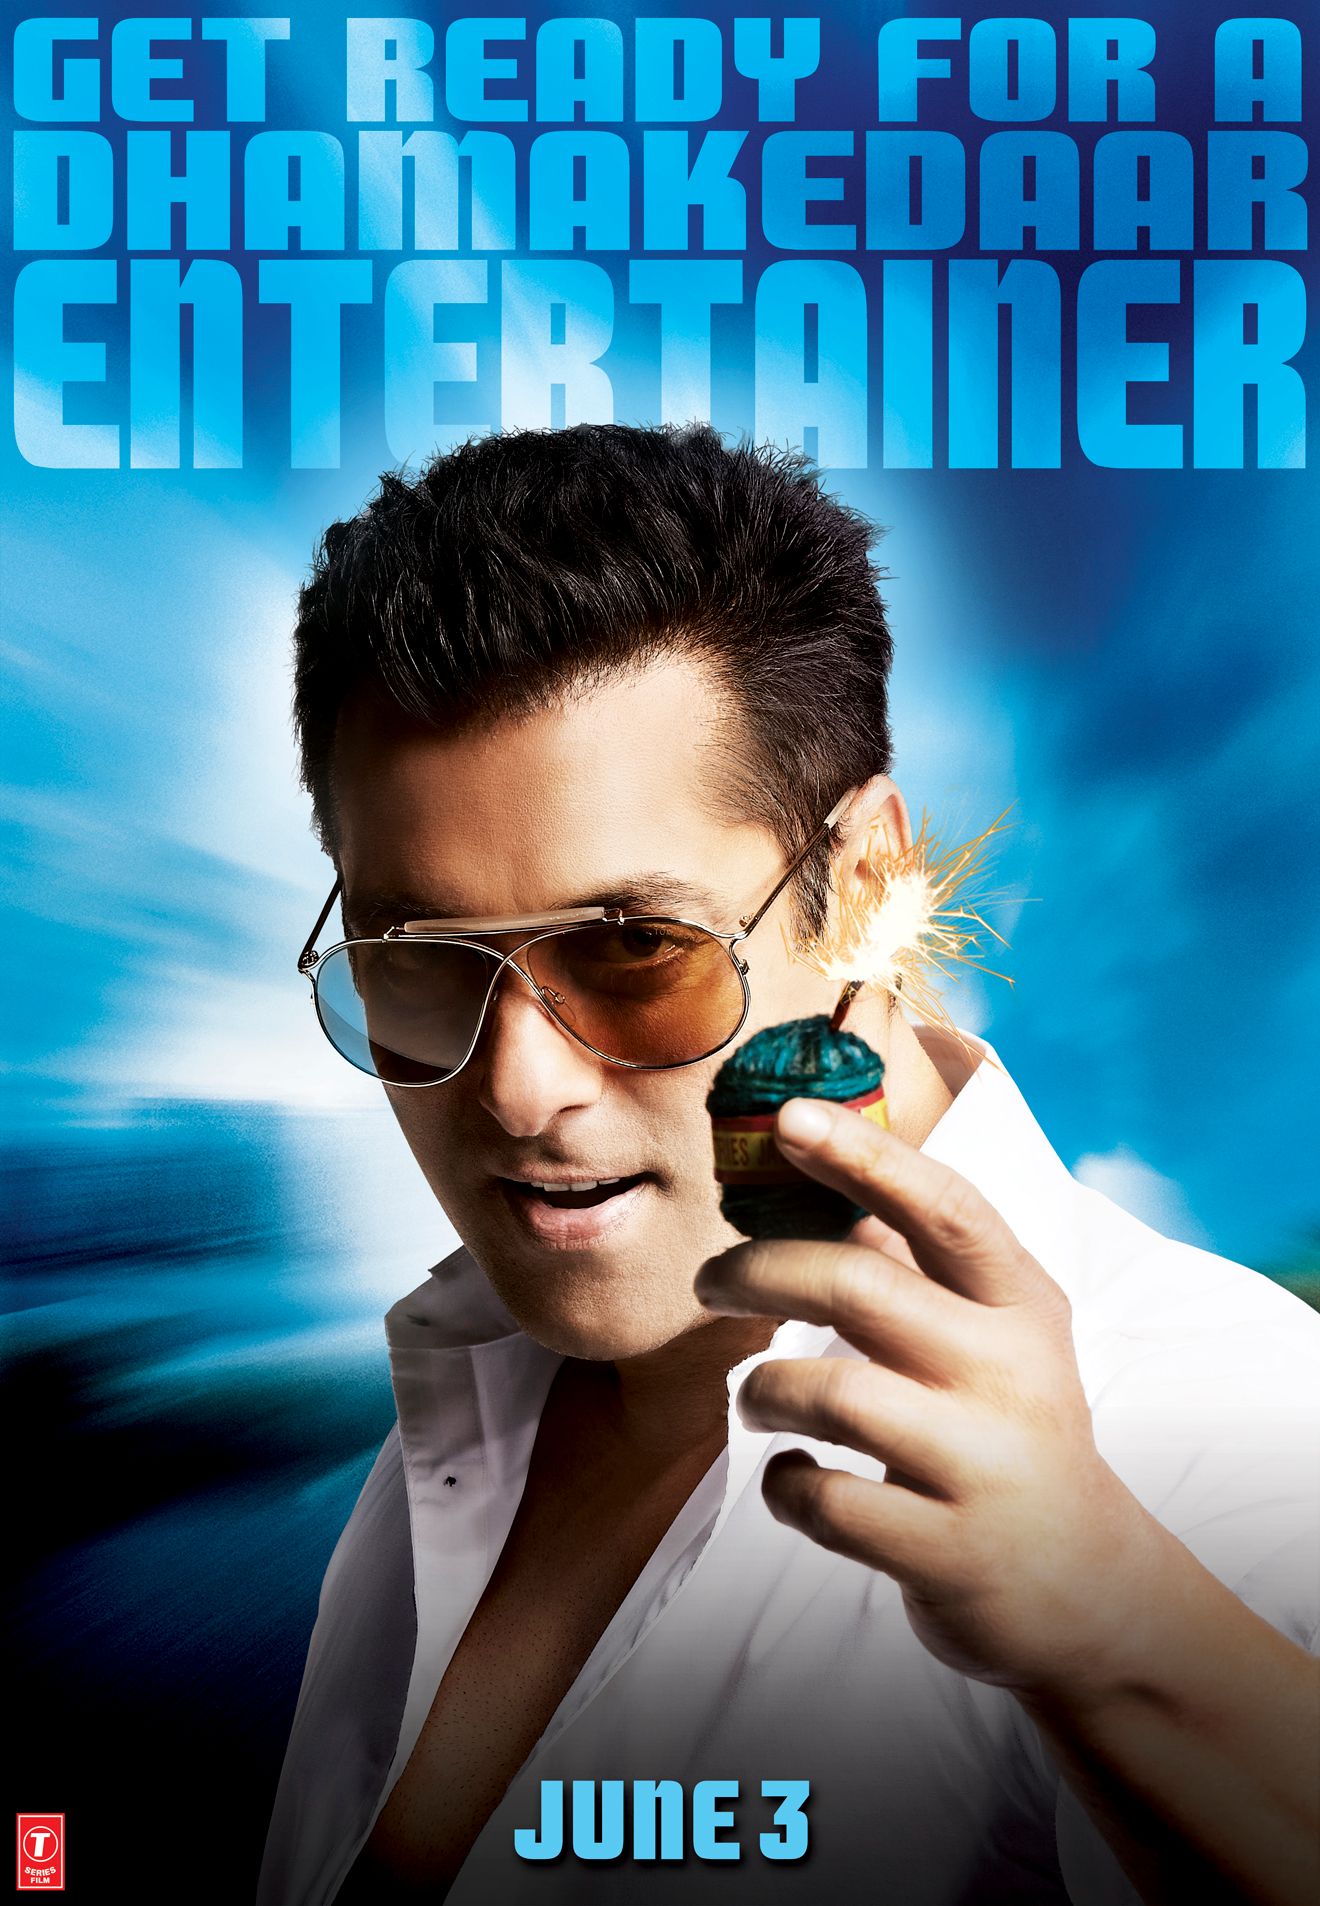 Are you ‘Ready’ for Salman Khan?